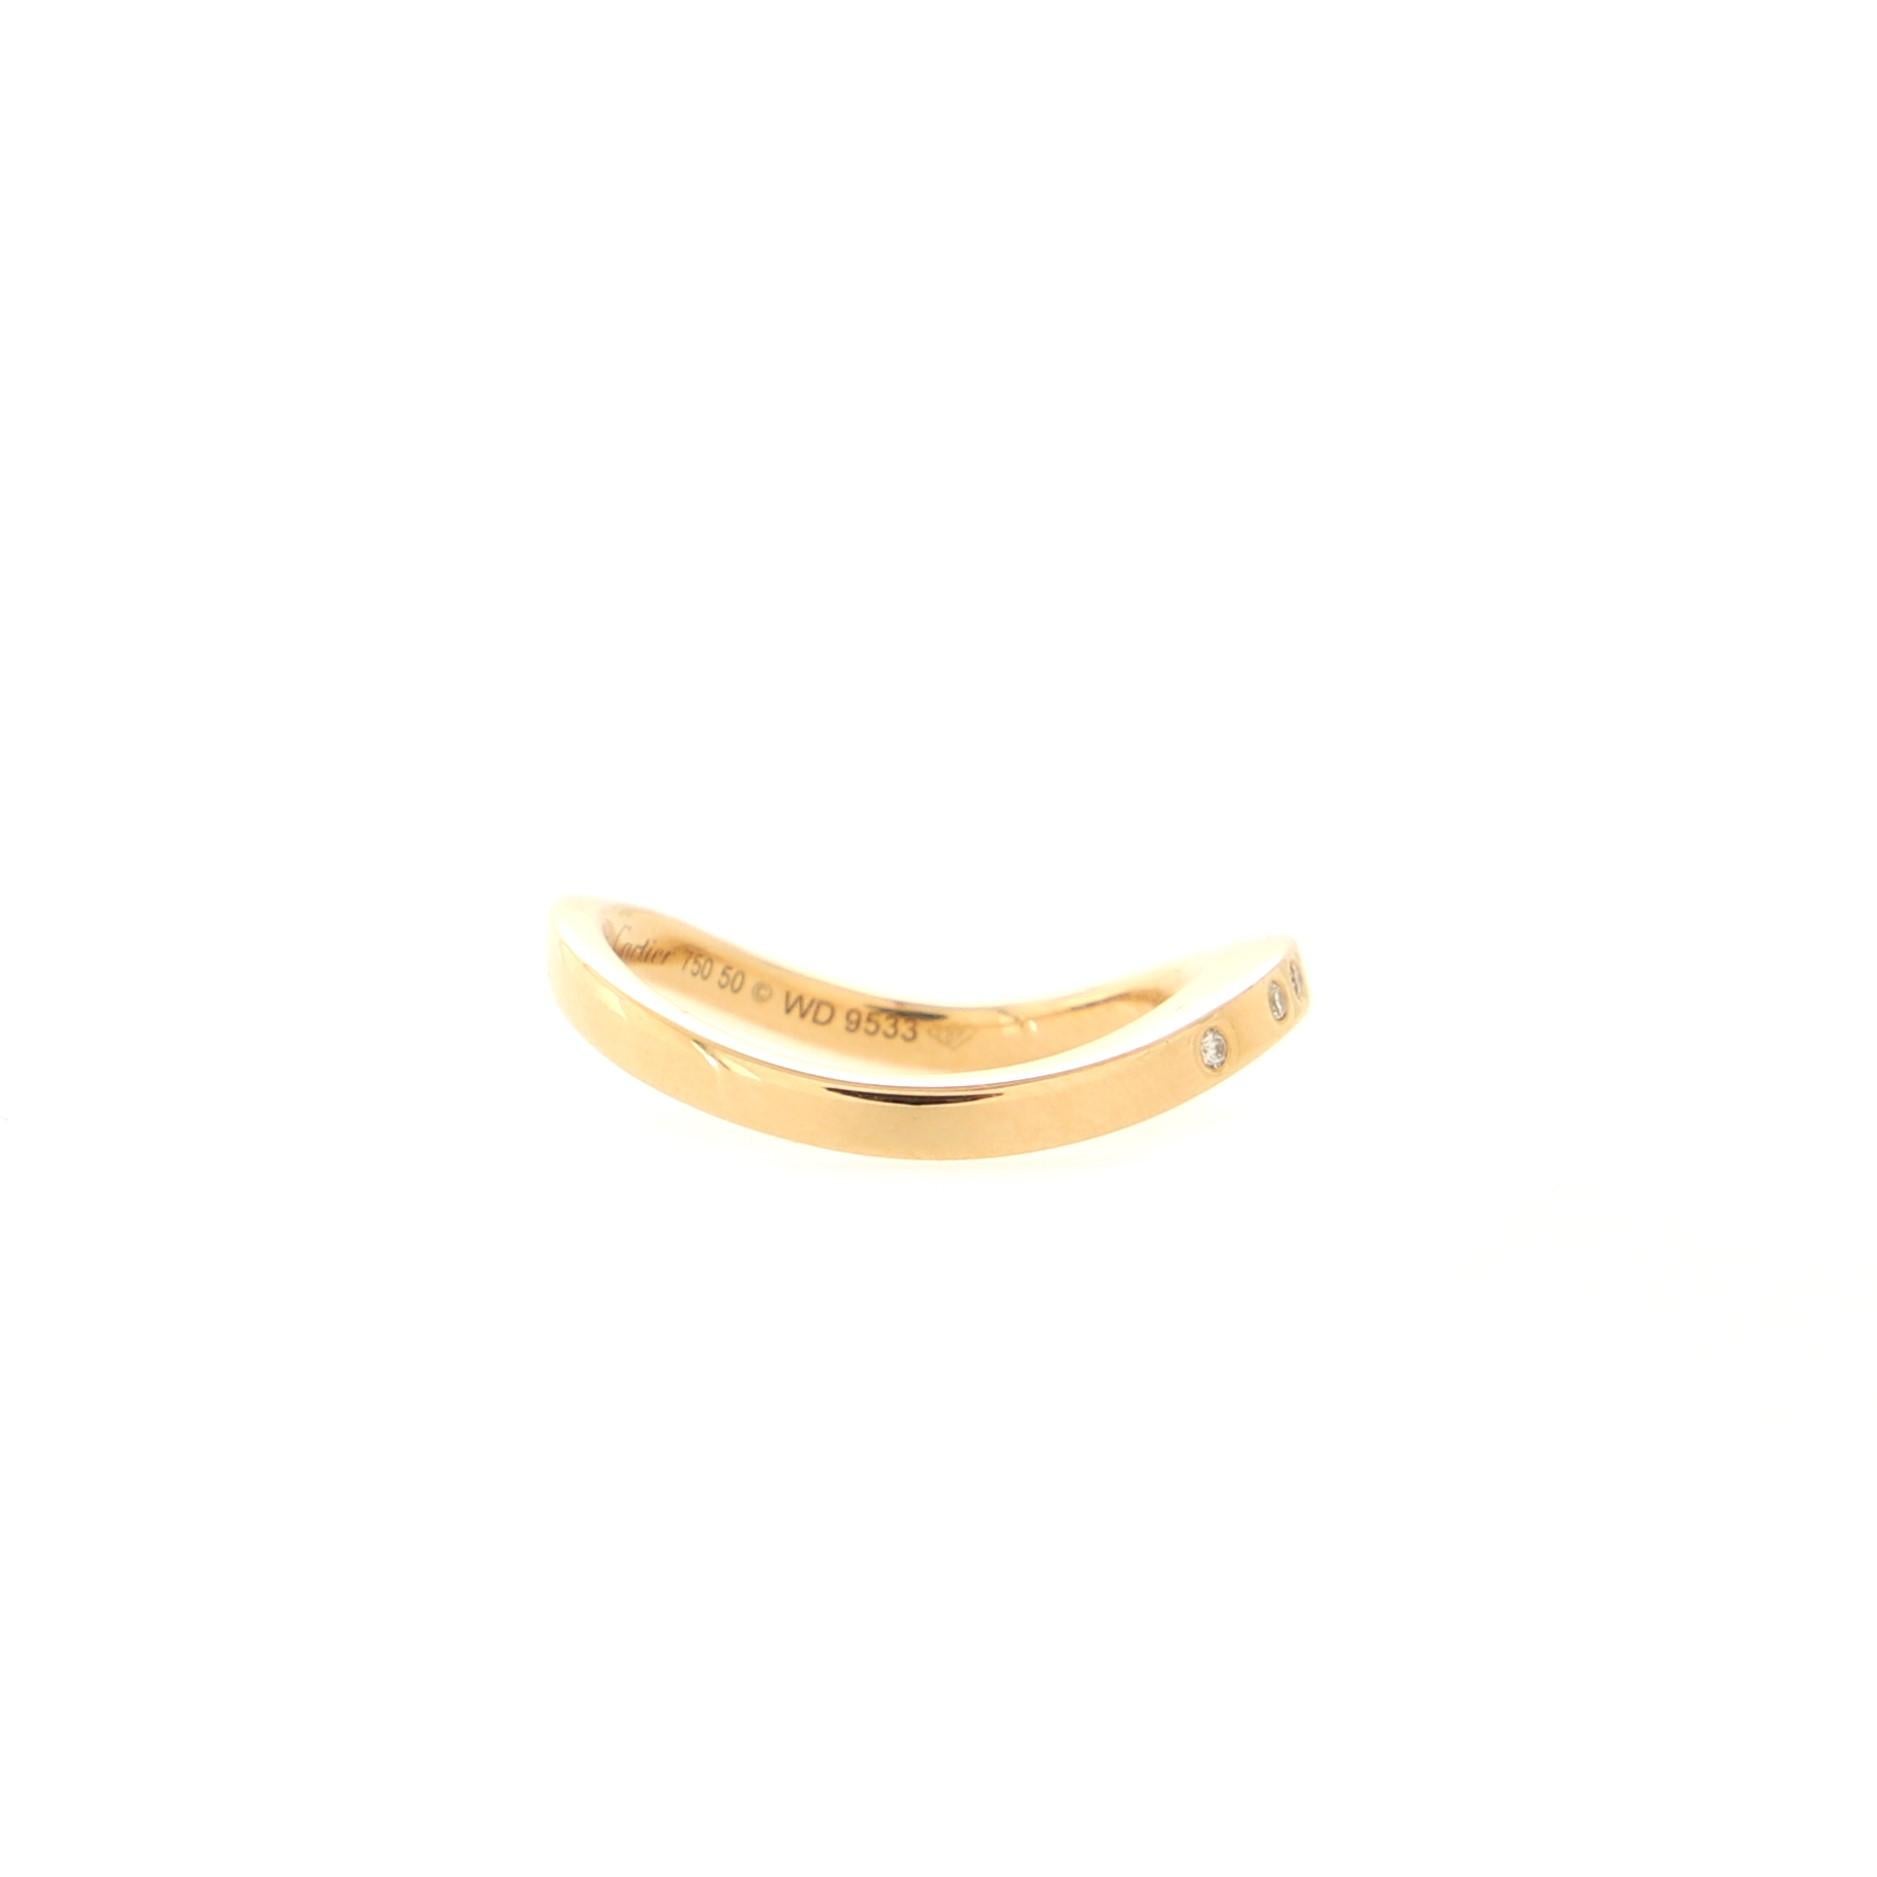 Condition: Great. Minor wear throughout.
Accessories: No Accessories
Measurements: Size: 5.25 - 50, Width: 2.00 mm
Designer: Cartier
Model: Ballerine Wedding Band Ring 18K Yellow Gold and Diamonds
Exterior Color: Yellow Gold
Item Number: 171876/477